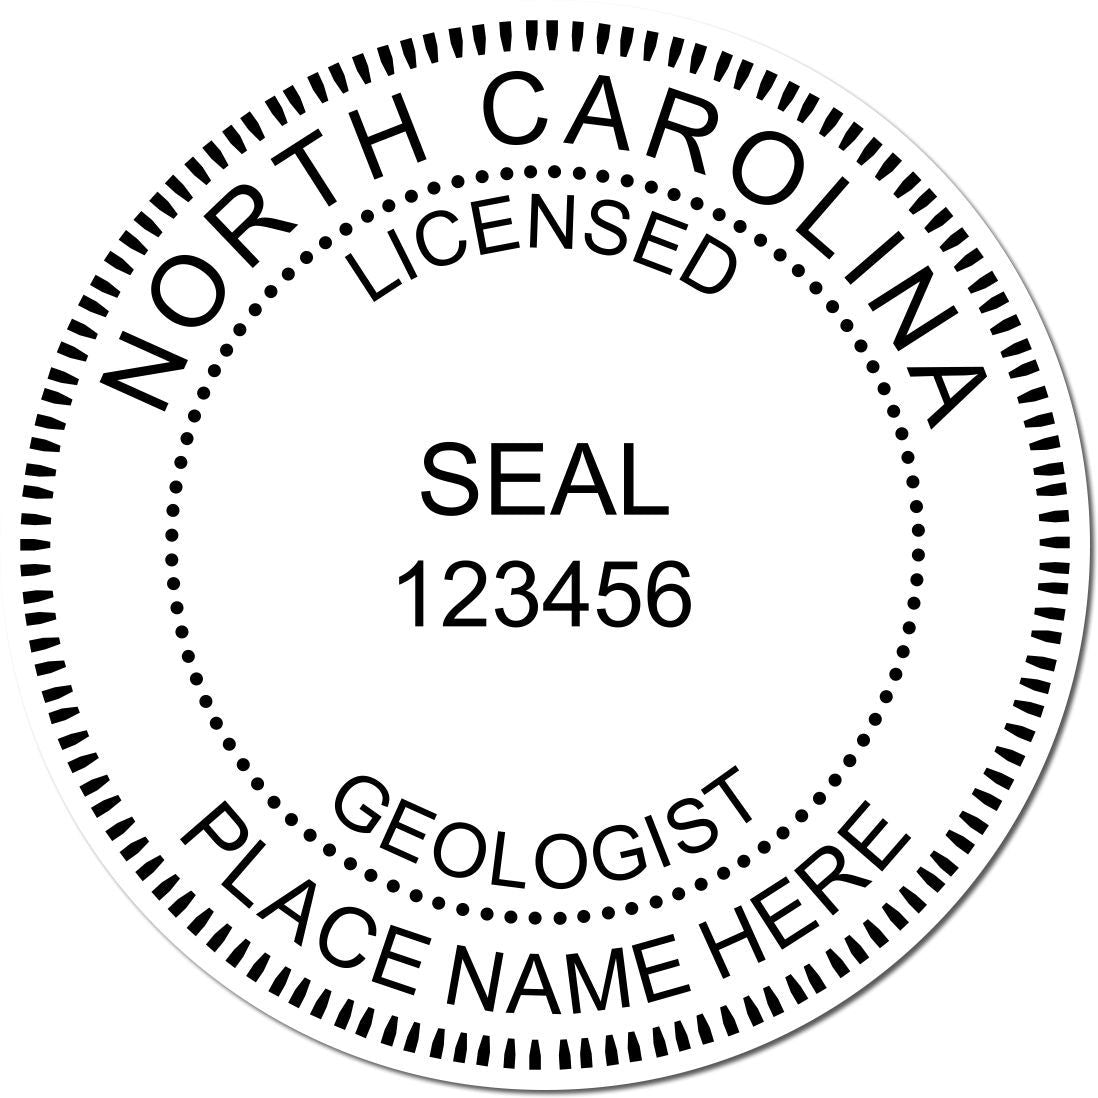 This paper is stamped with a sample imprint of the Slim Pre-Inked North Carolina Professional Geologist Seal Stamp, signifying its quality and reliability.